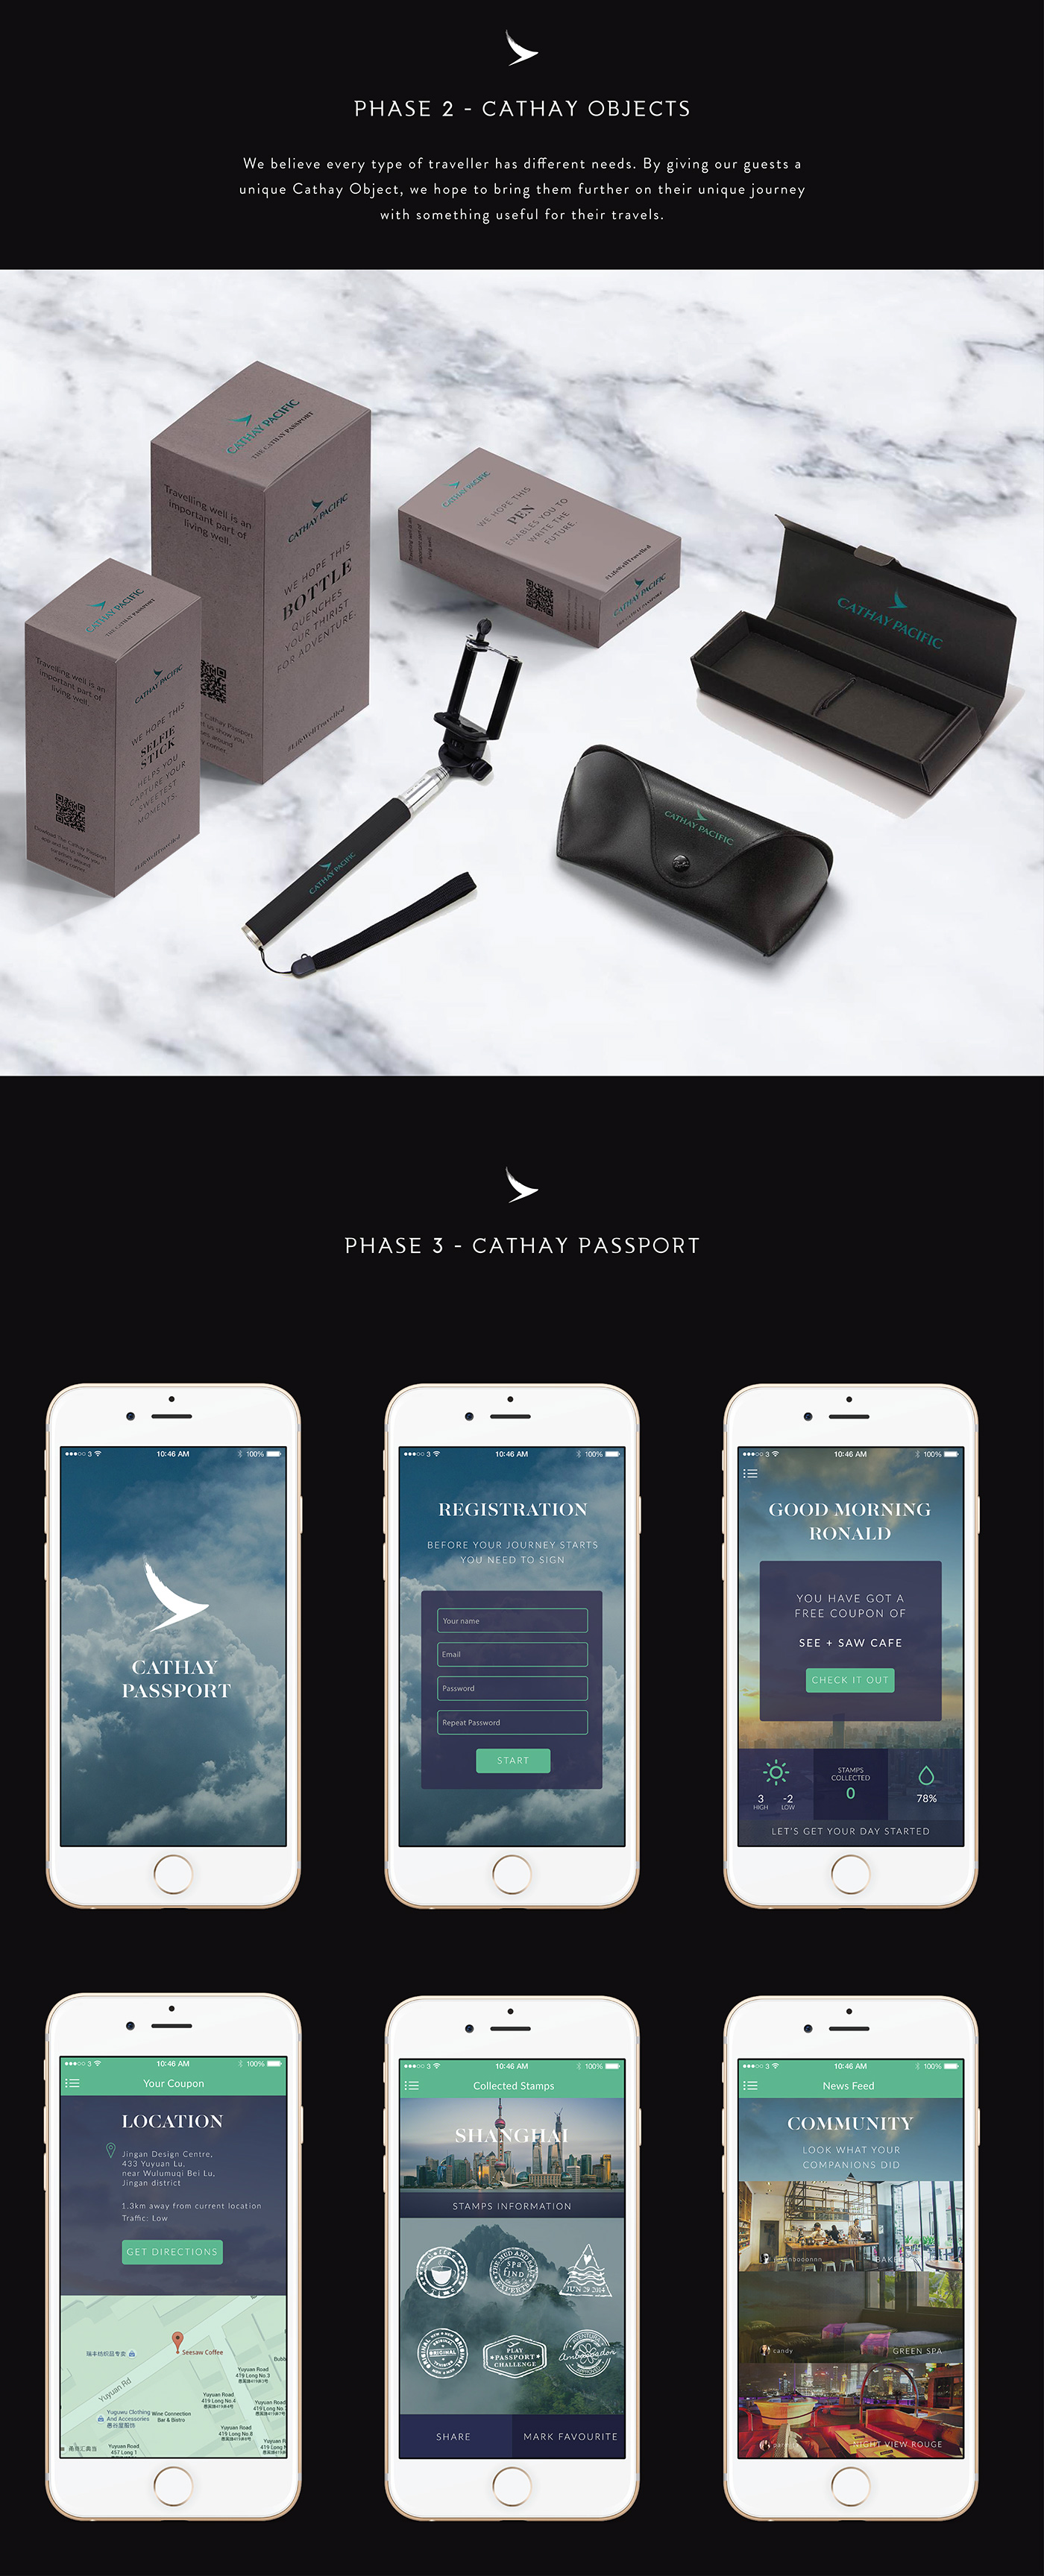 cathay pacific airline campaign life well travelled digital creative concepting Hong Kong app design